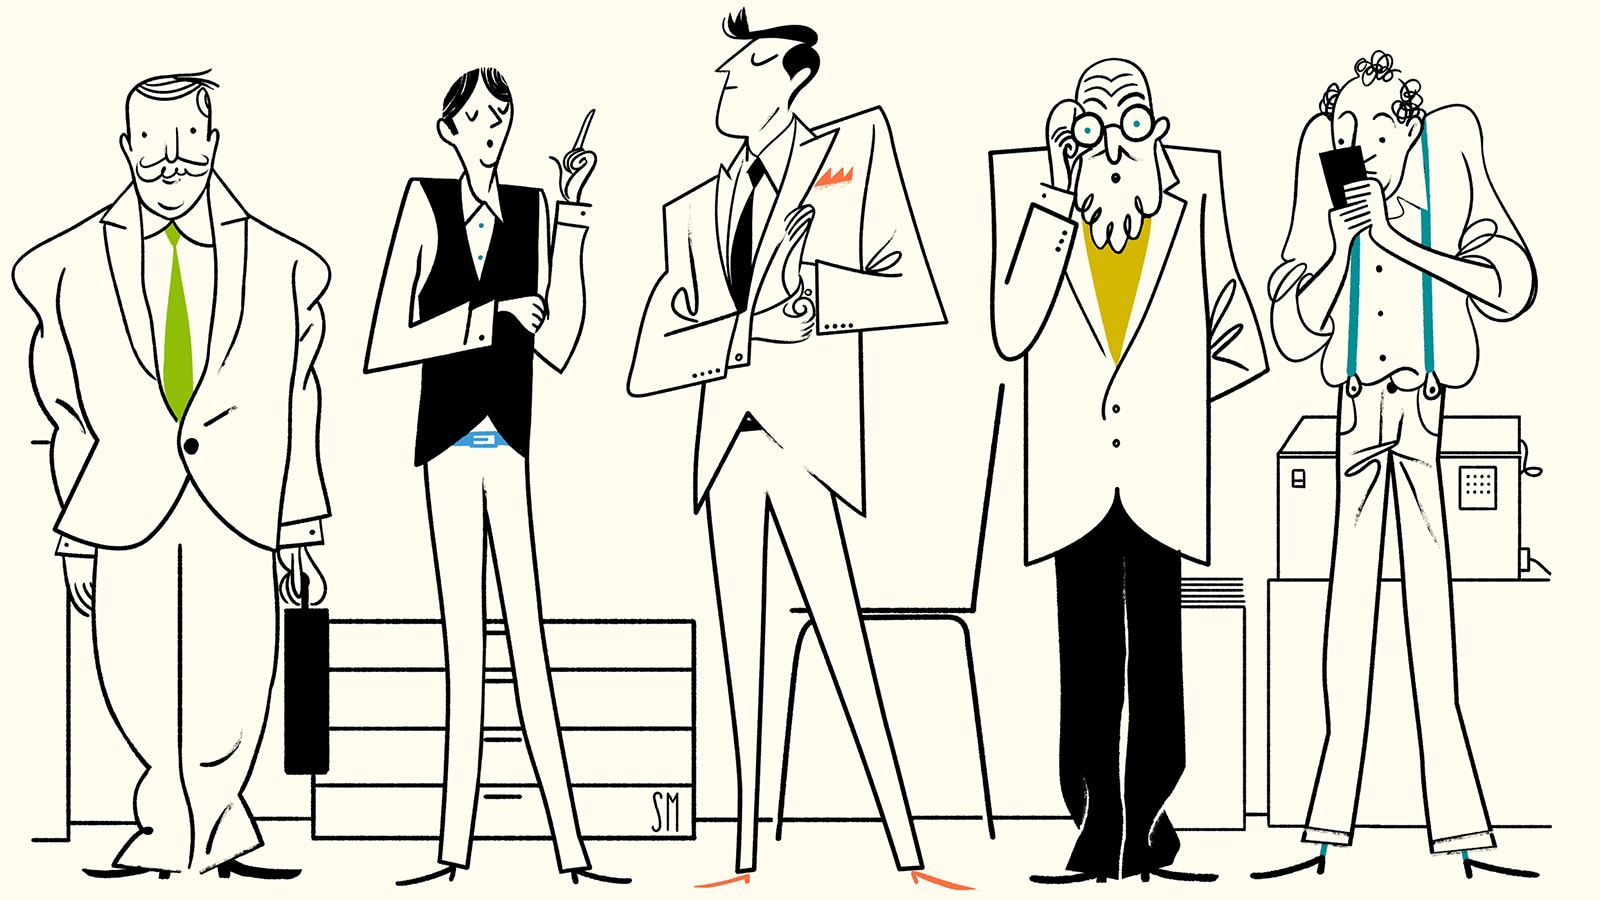 Why Body Language Might Be The Key To A Promotion | The Journal | MR PORTER